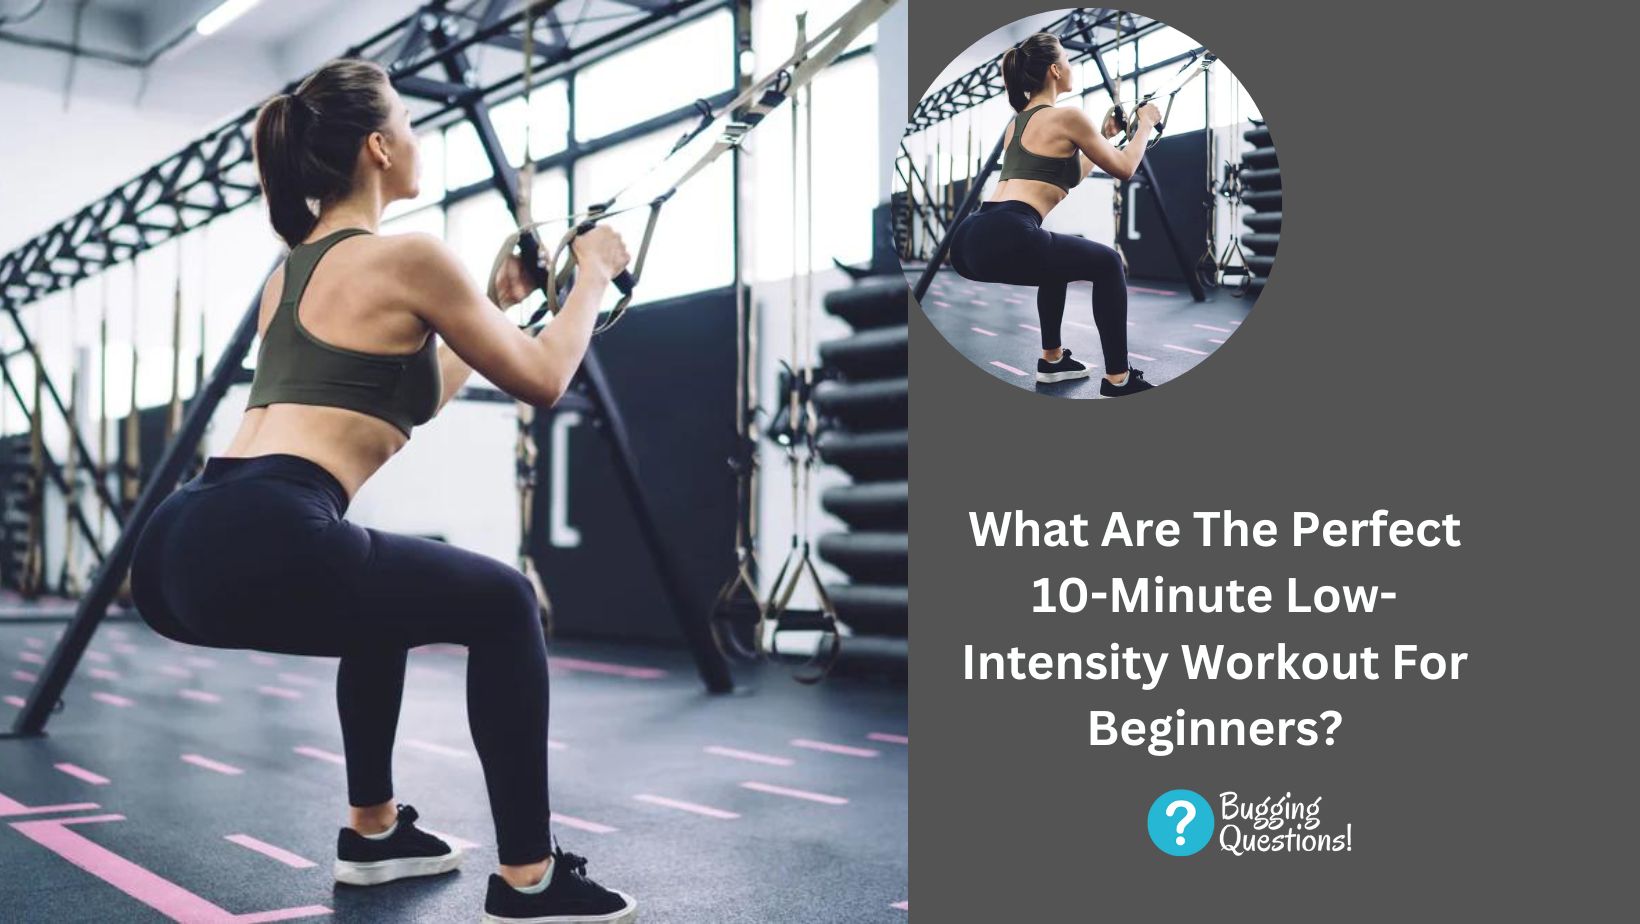 What Are The Perfect 10-Minute Low-Intensity Workout For Beginners?